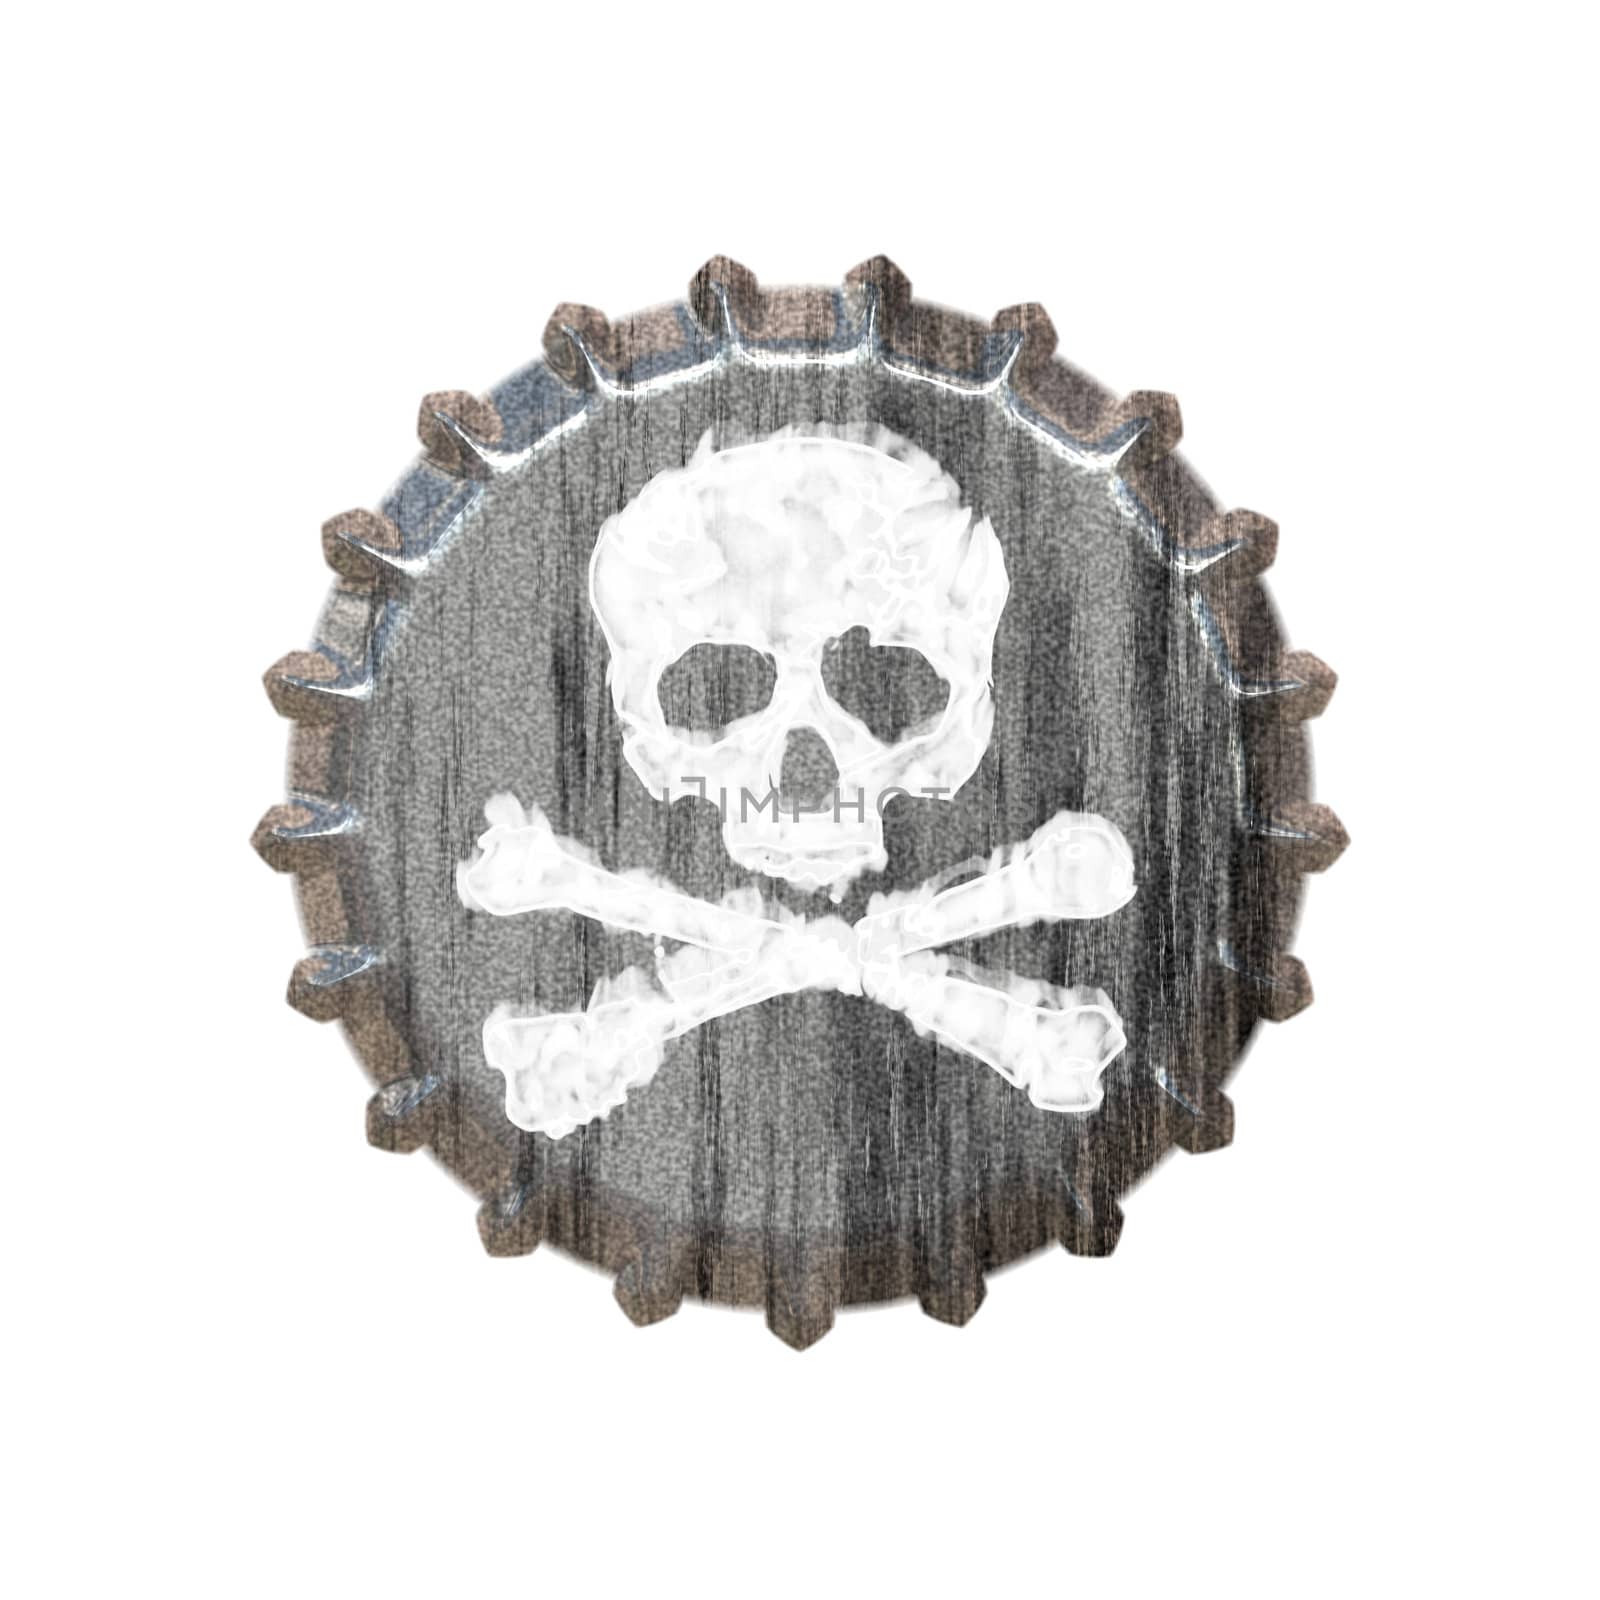 A bottle cap with a skull and crossbones great for concepts of alcohol abuse or addiction.